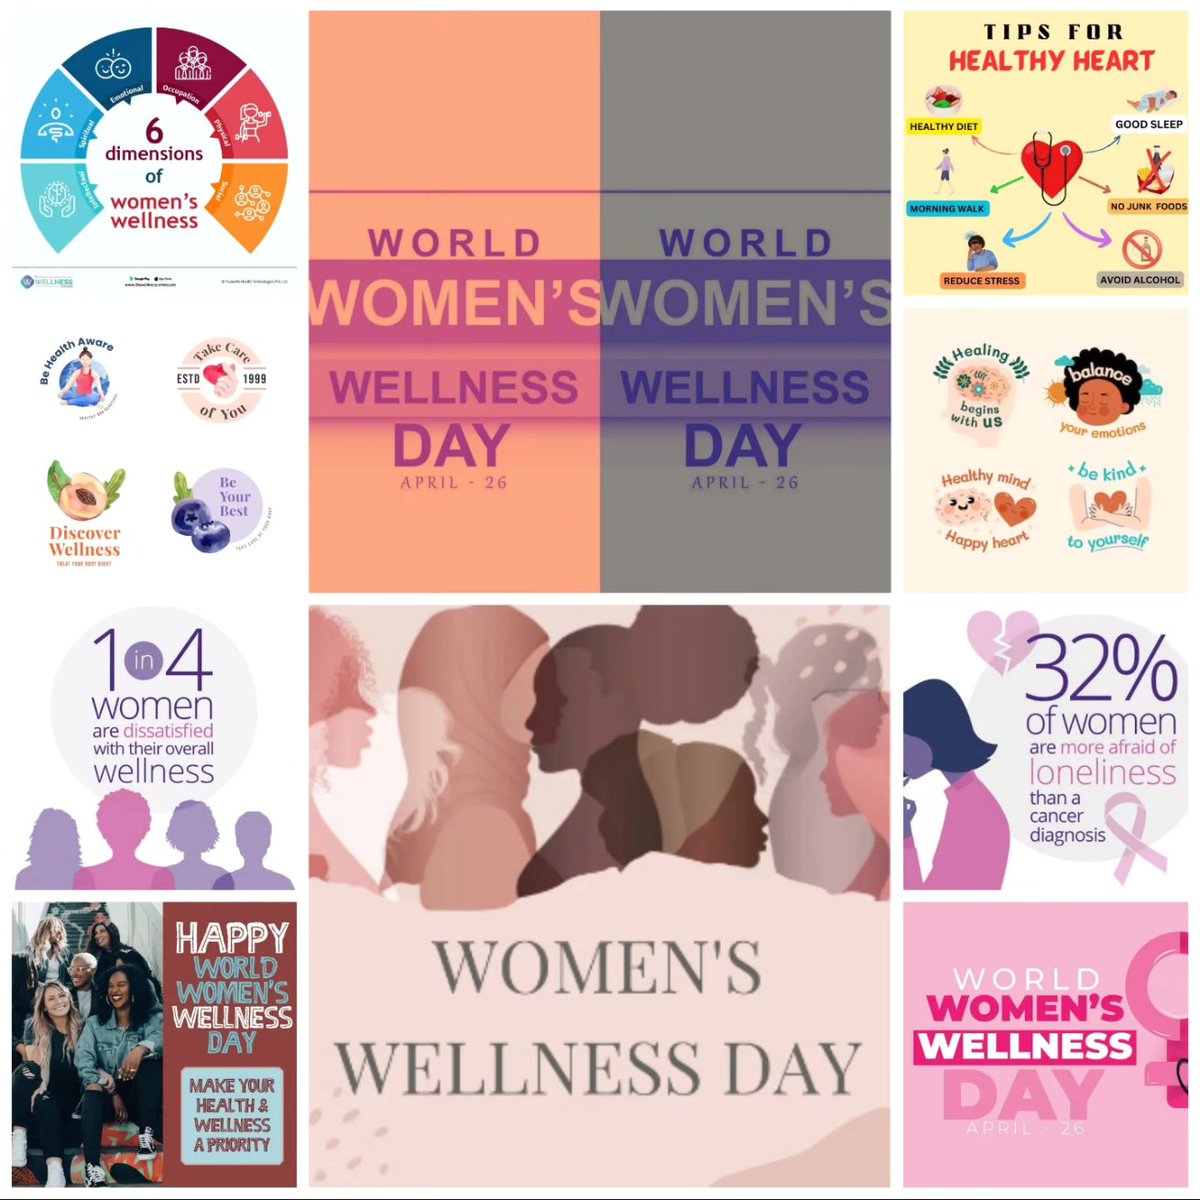 Let's celebrate World Women's Wellness Day: ♀️🙏🏾💕🫂✨️ 'The foundation of your wellness journey is presence – quieting the chatter in your head, feeling yourself in the moment and knowing you are okay.' Anon #WorldWomensWellnessDay #WomensWellnessDay #SelfCareMatters